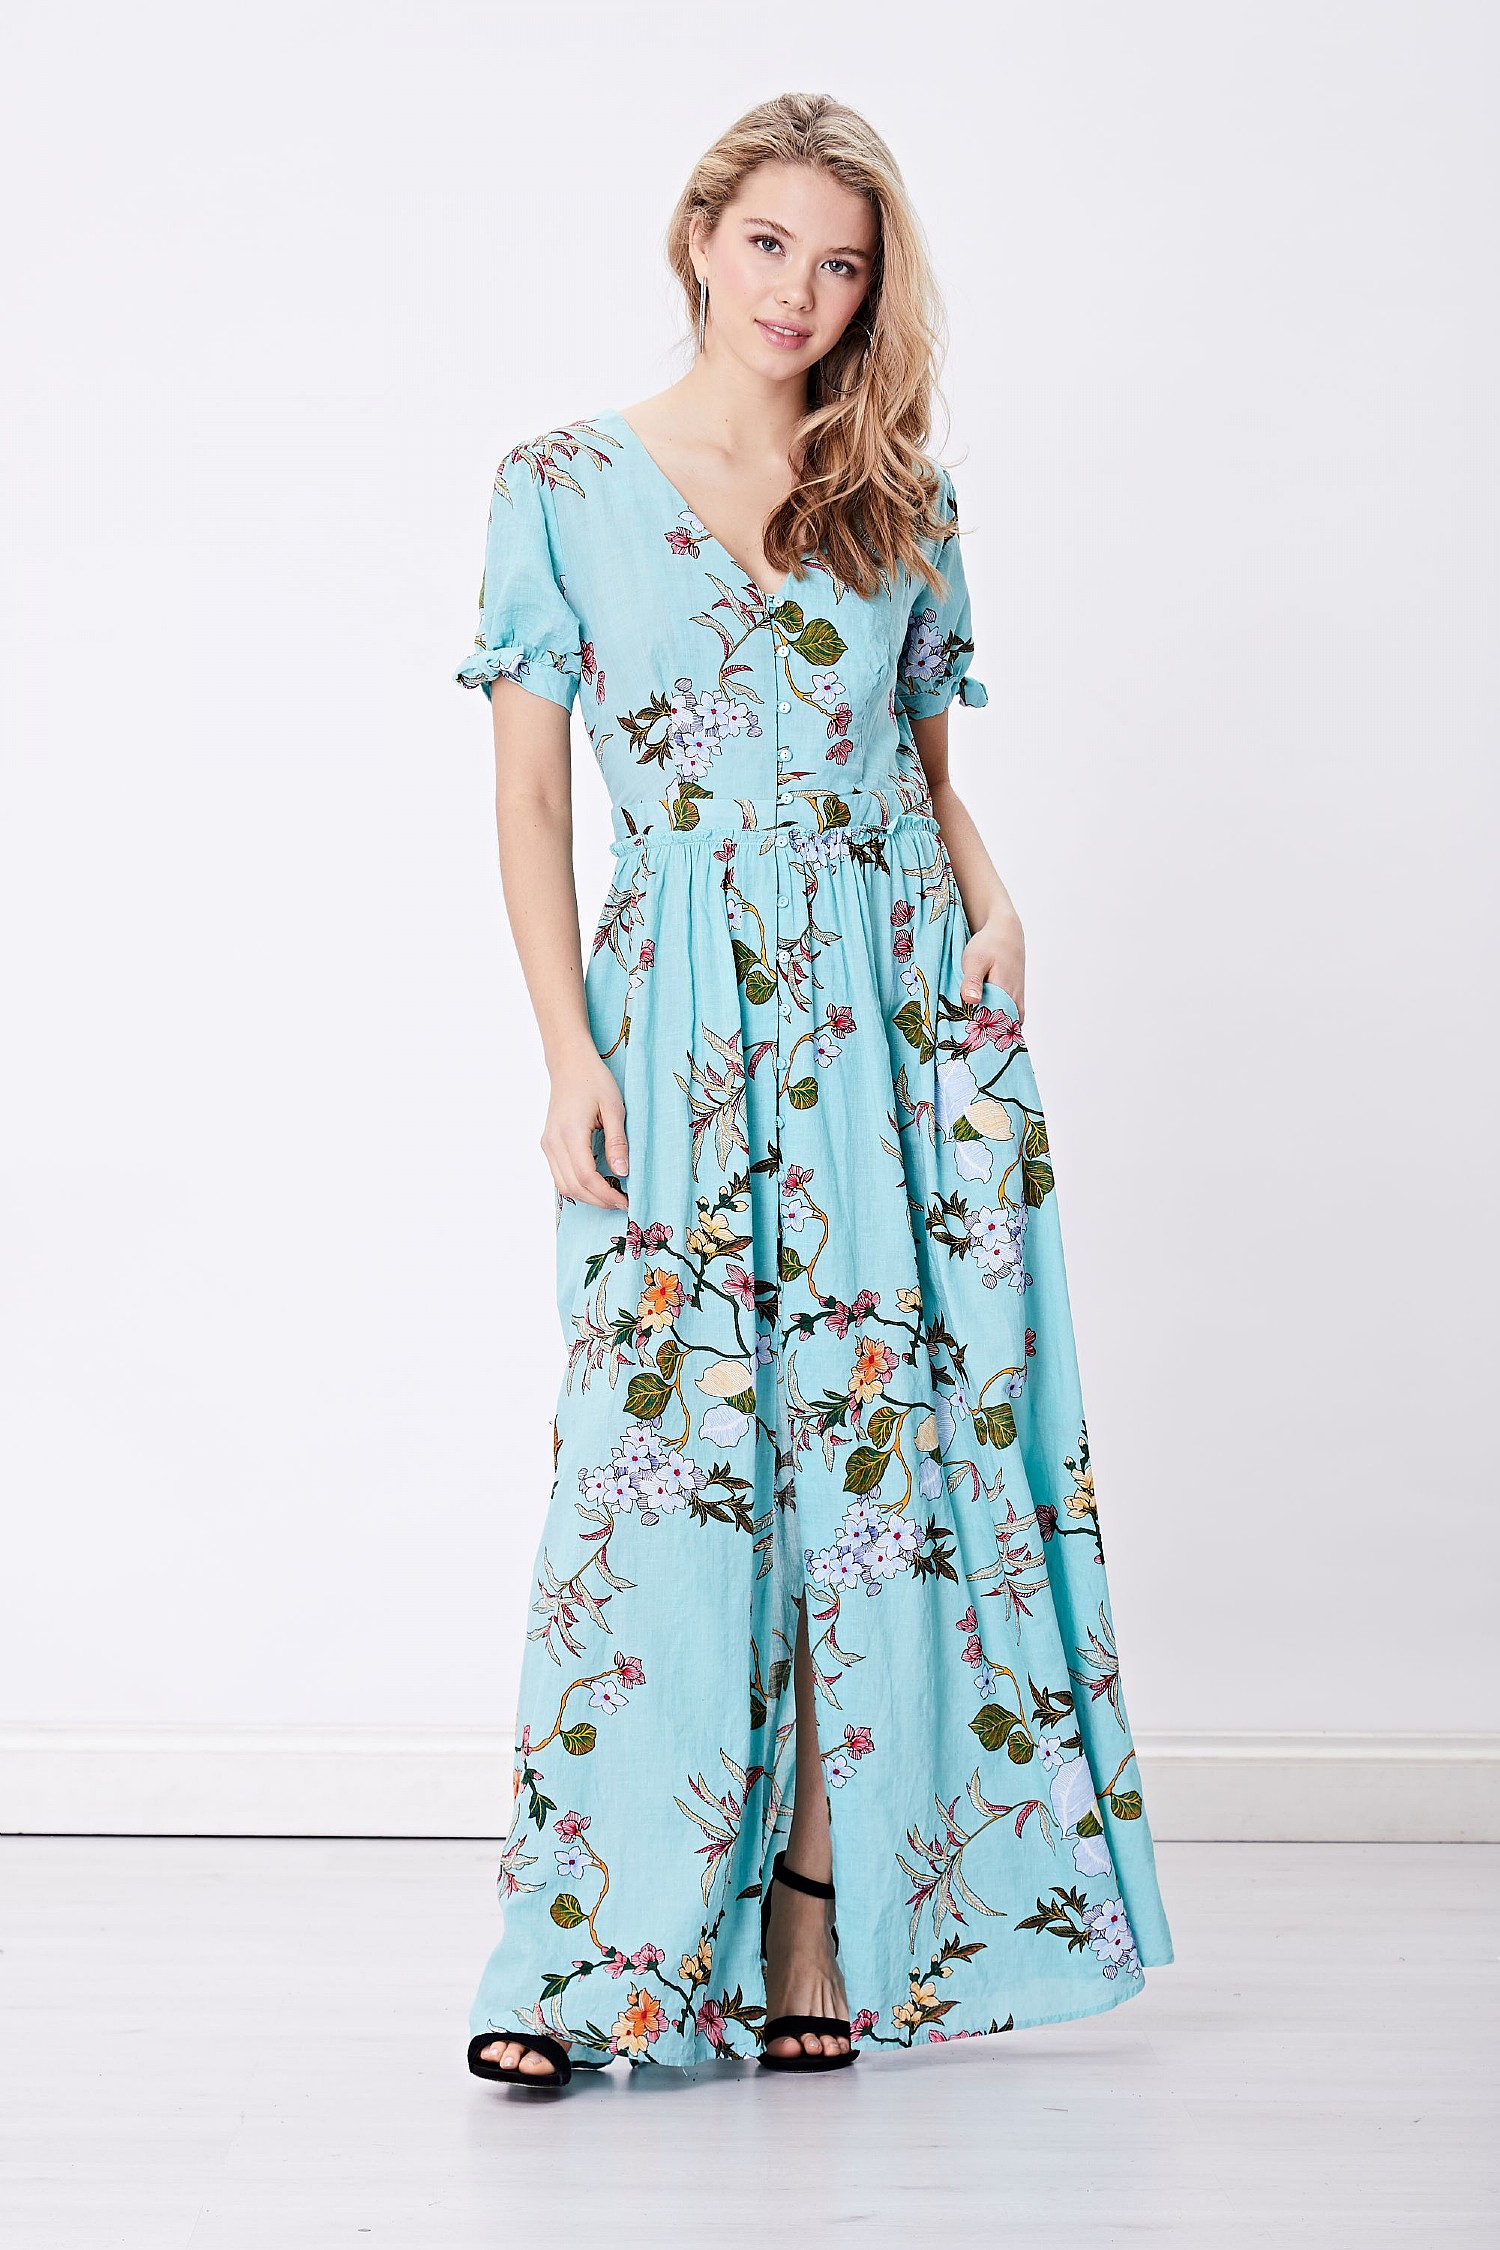 ANGELEYE Light Turquoise Floral Maxi Dress